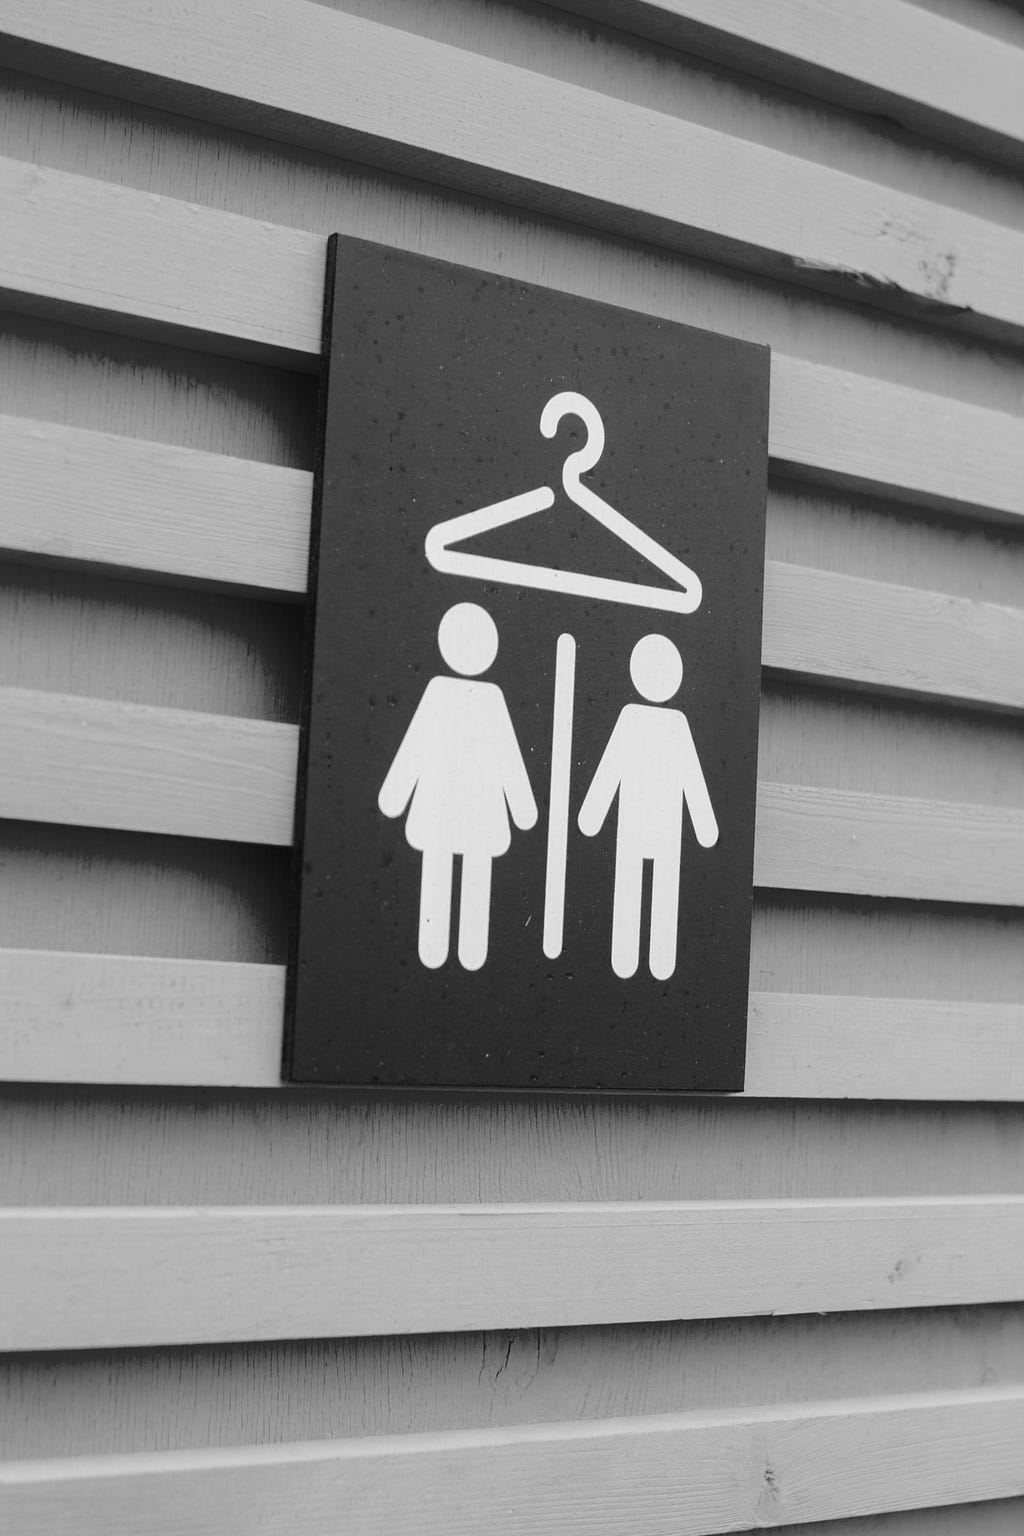 A displaying a pair of stick-figure gender symbols — female on the left and male on the right — separated by a line and a clothes hanger above, indicating a sex-segregated pair of changing rooms.